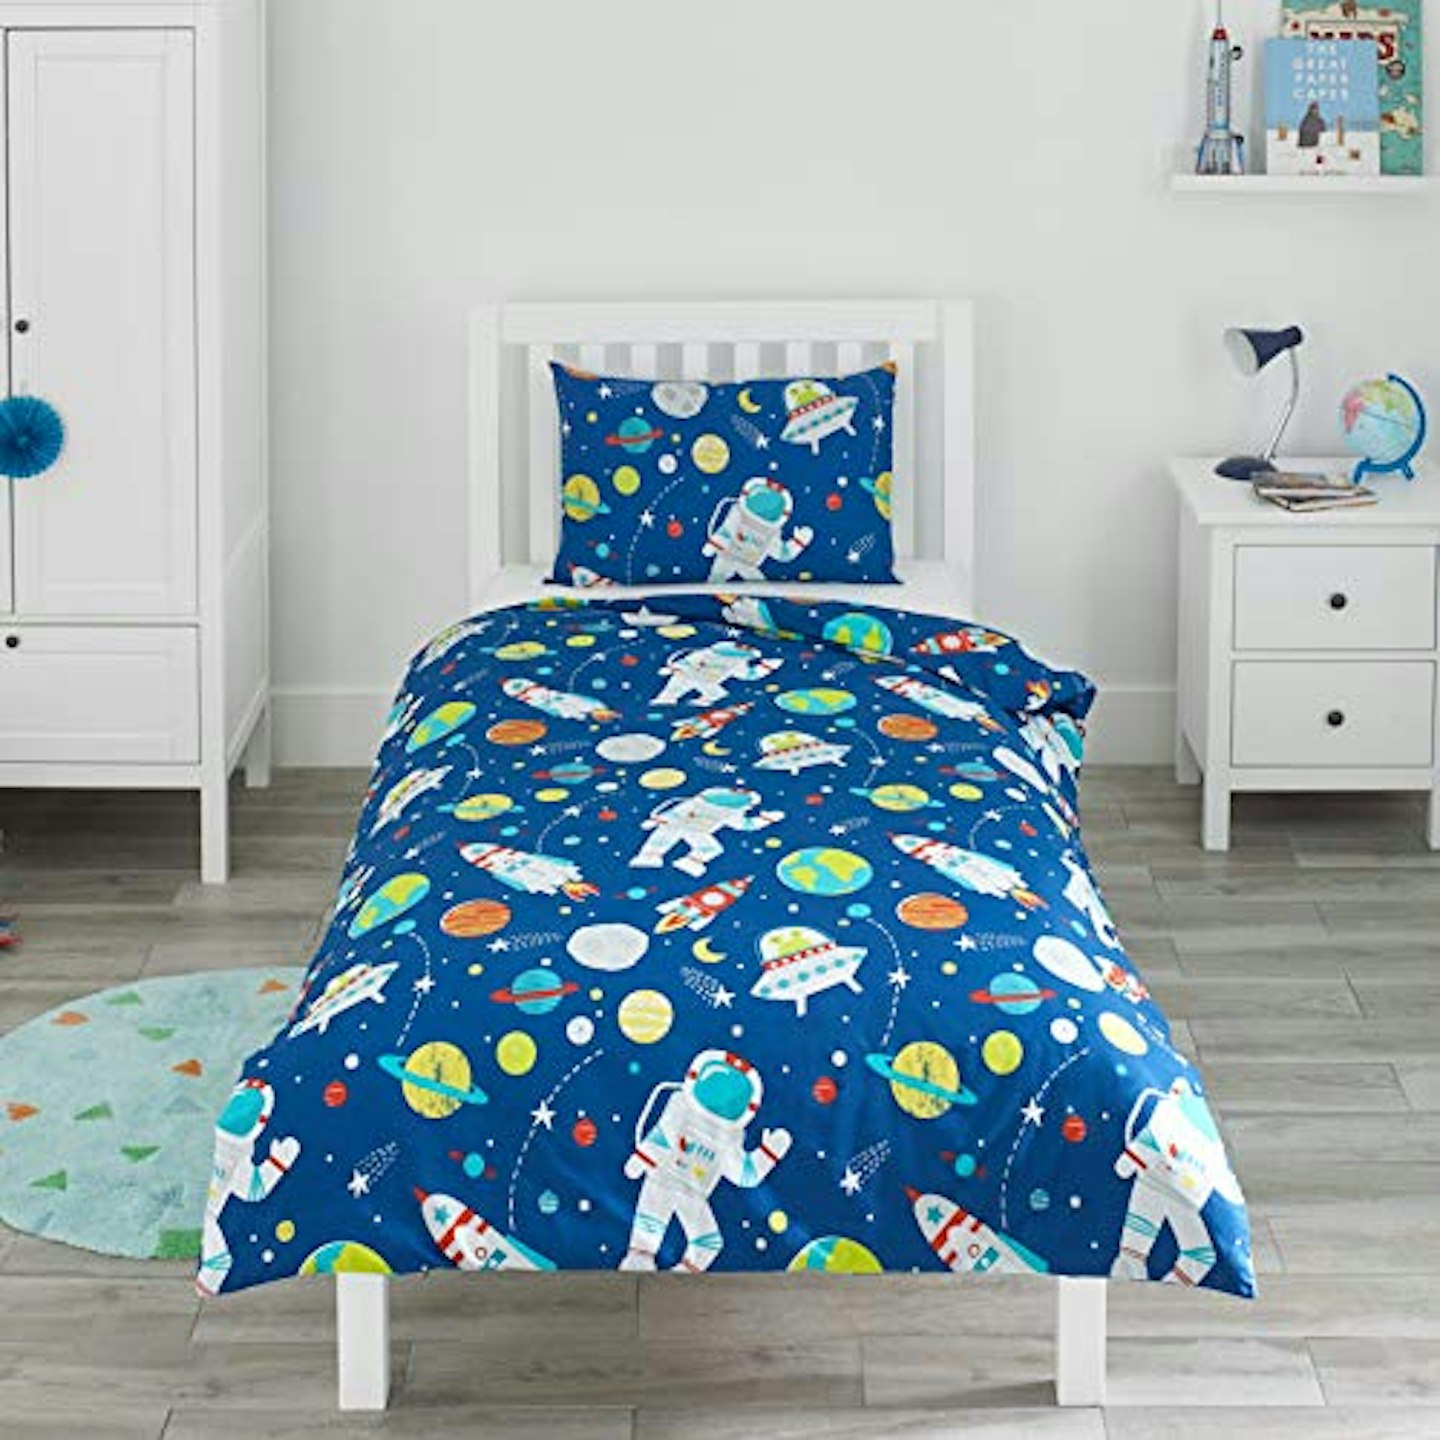 Bloomsbury Mill - Fun Outer Space Kids Bedding Set